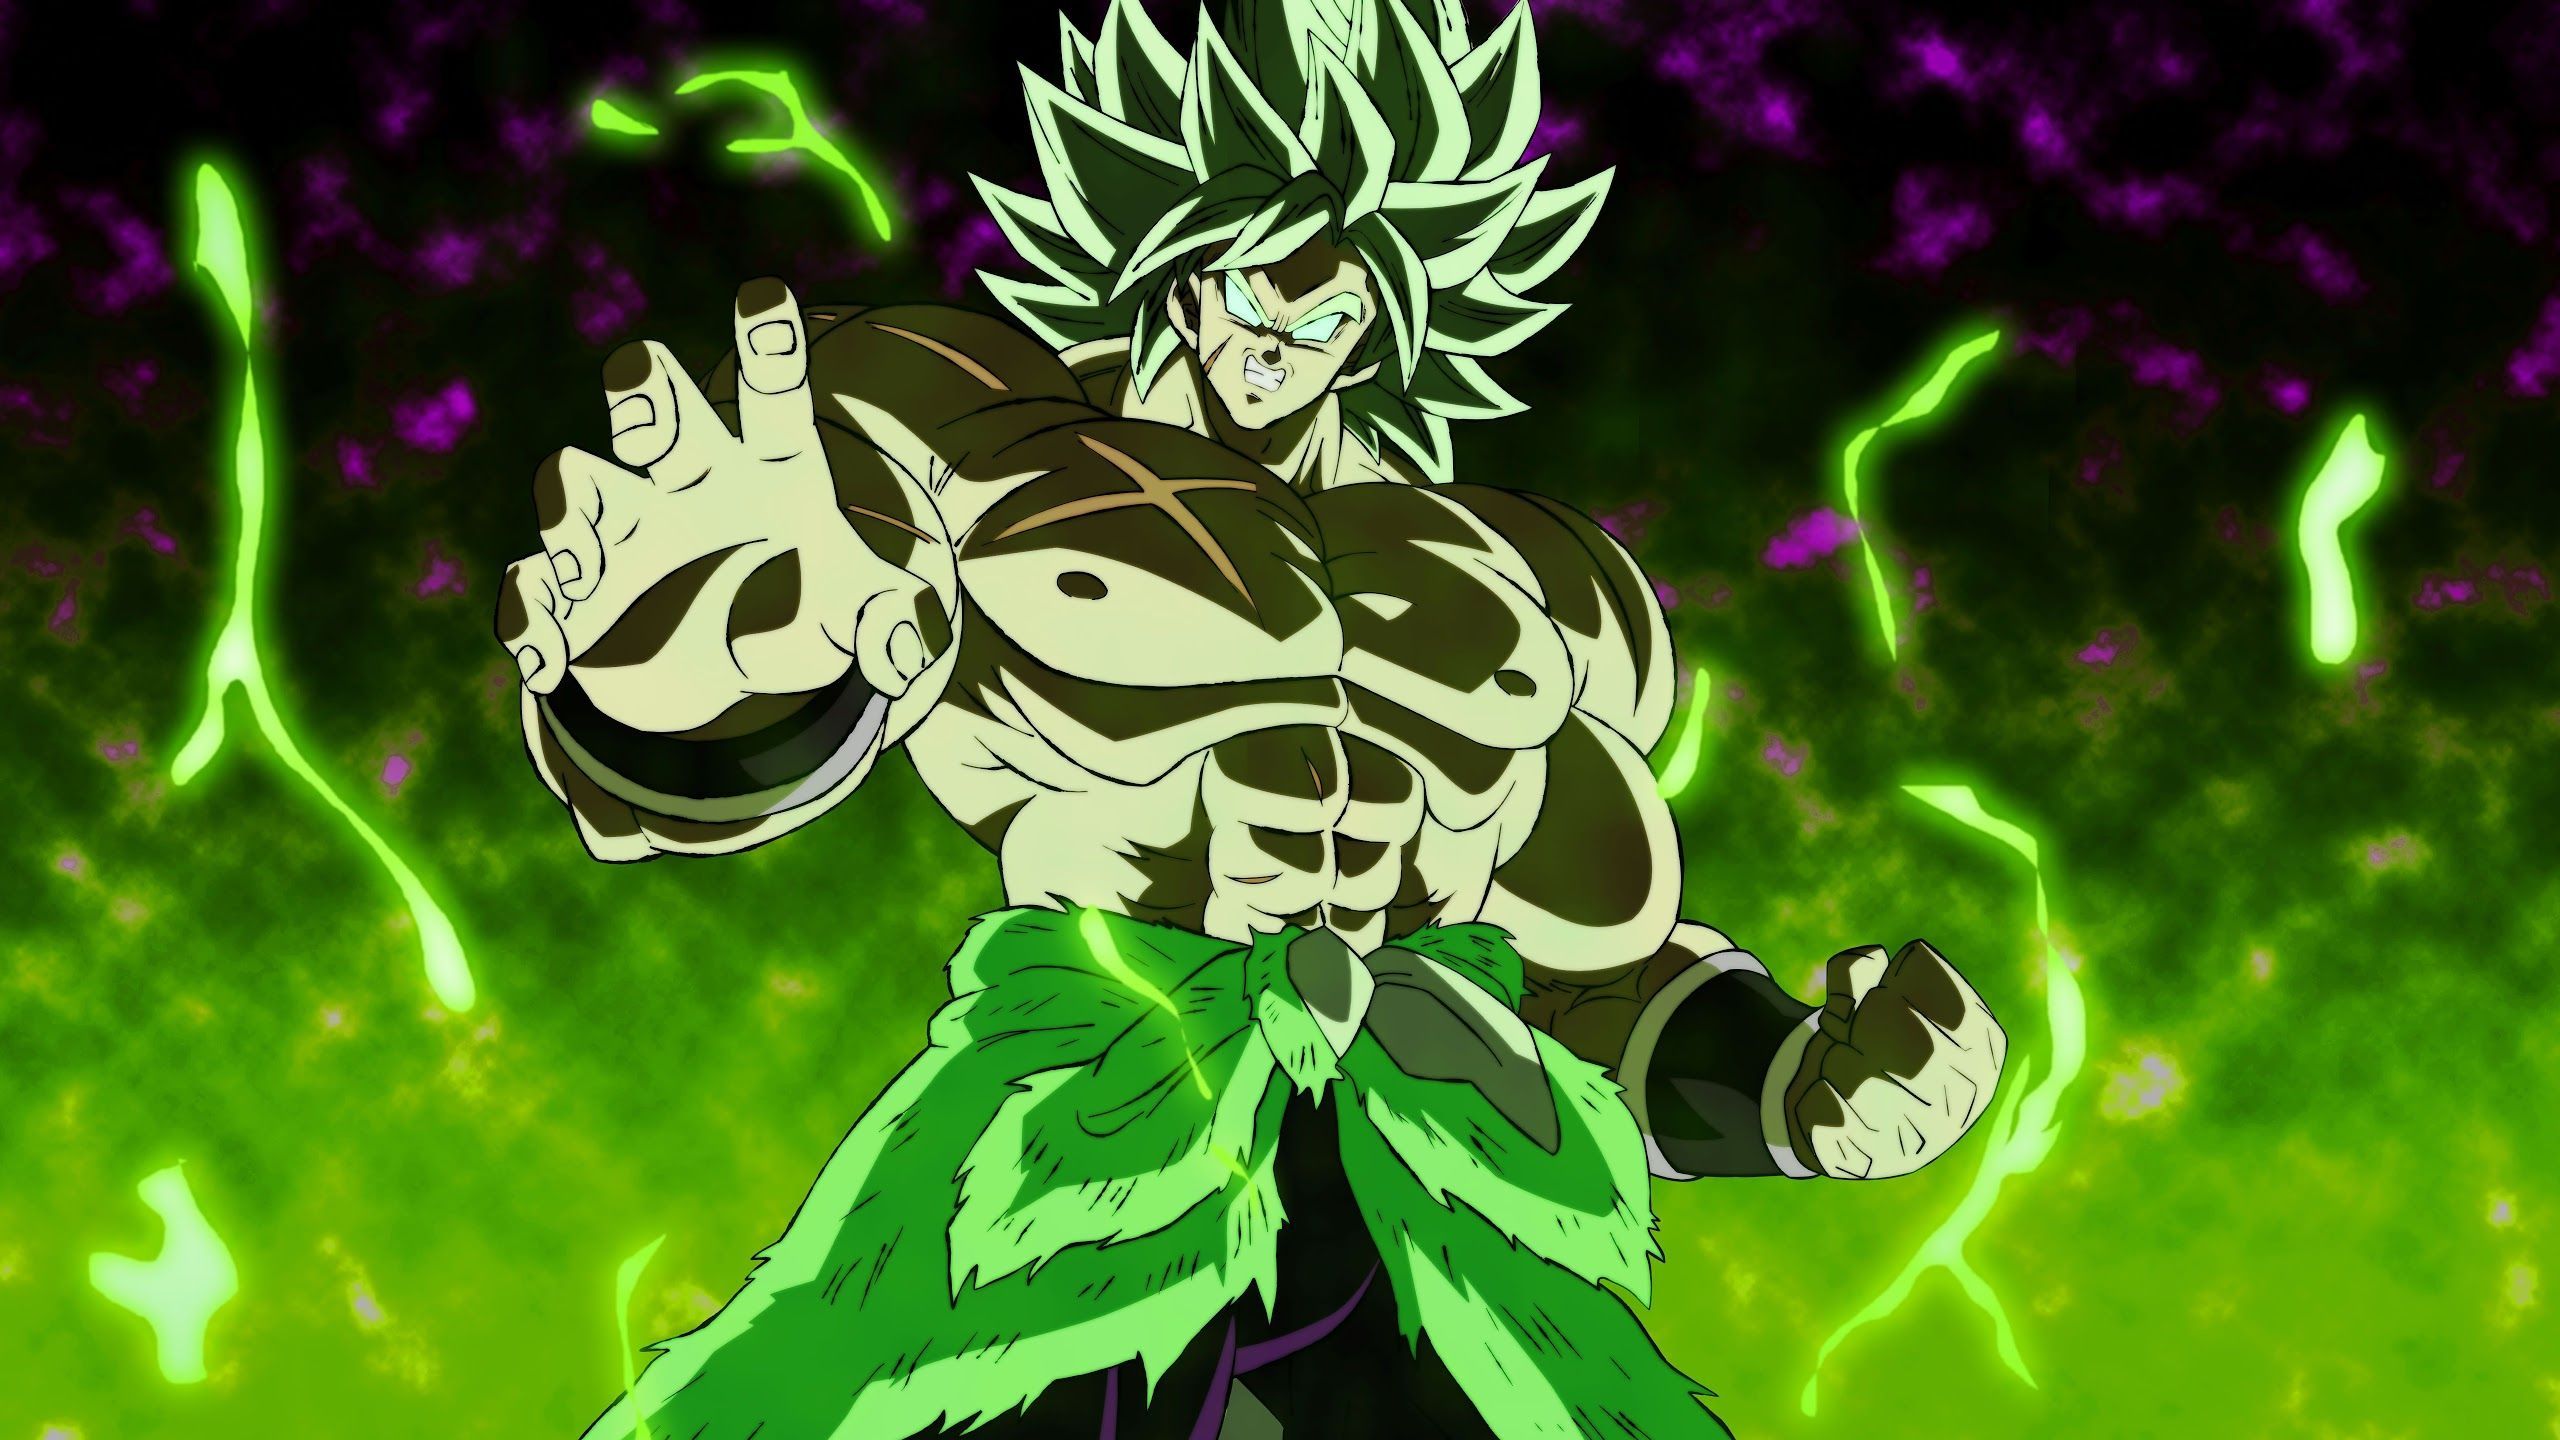 Broly Wallpaper for mobile phone, tablet, desktop computer and other devices HD and 4K wallpaper. Dragon ball goku, Anime dragon ball, Dragon ball super manga